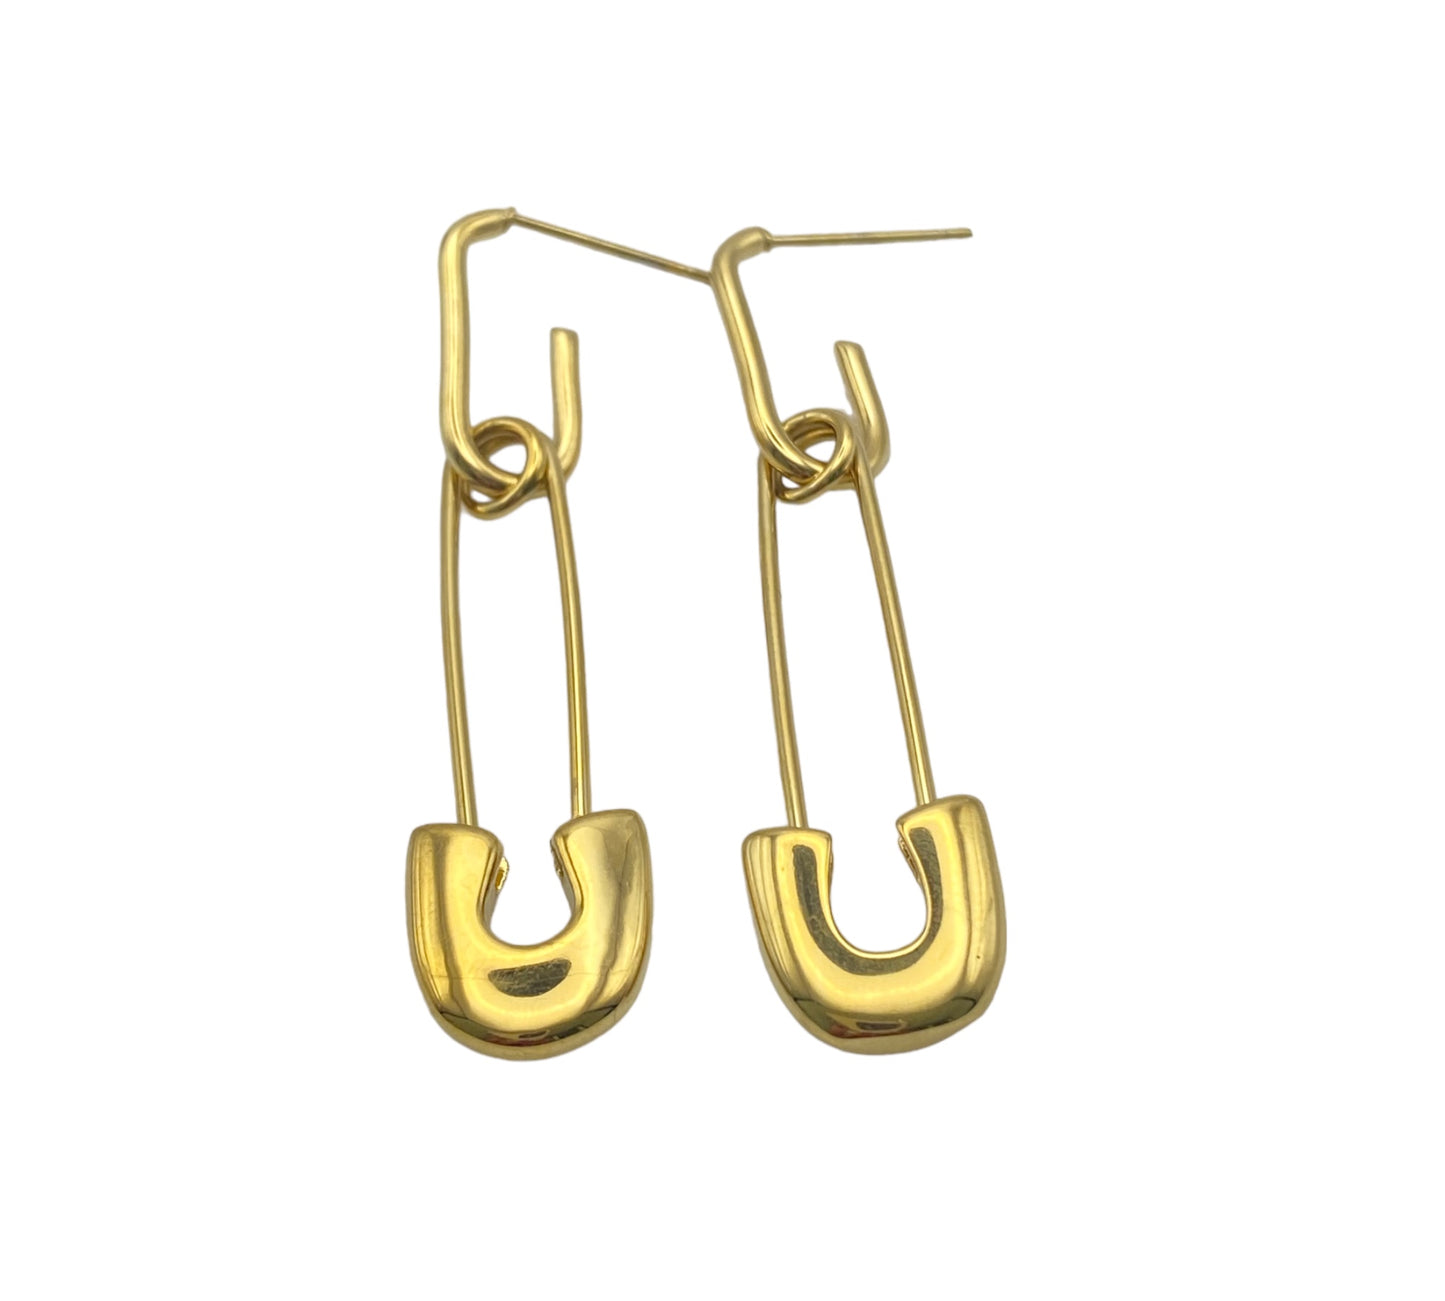 "EOS" gold plated open oval hoops with safety pin pendant